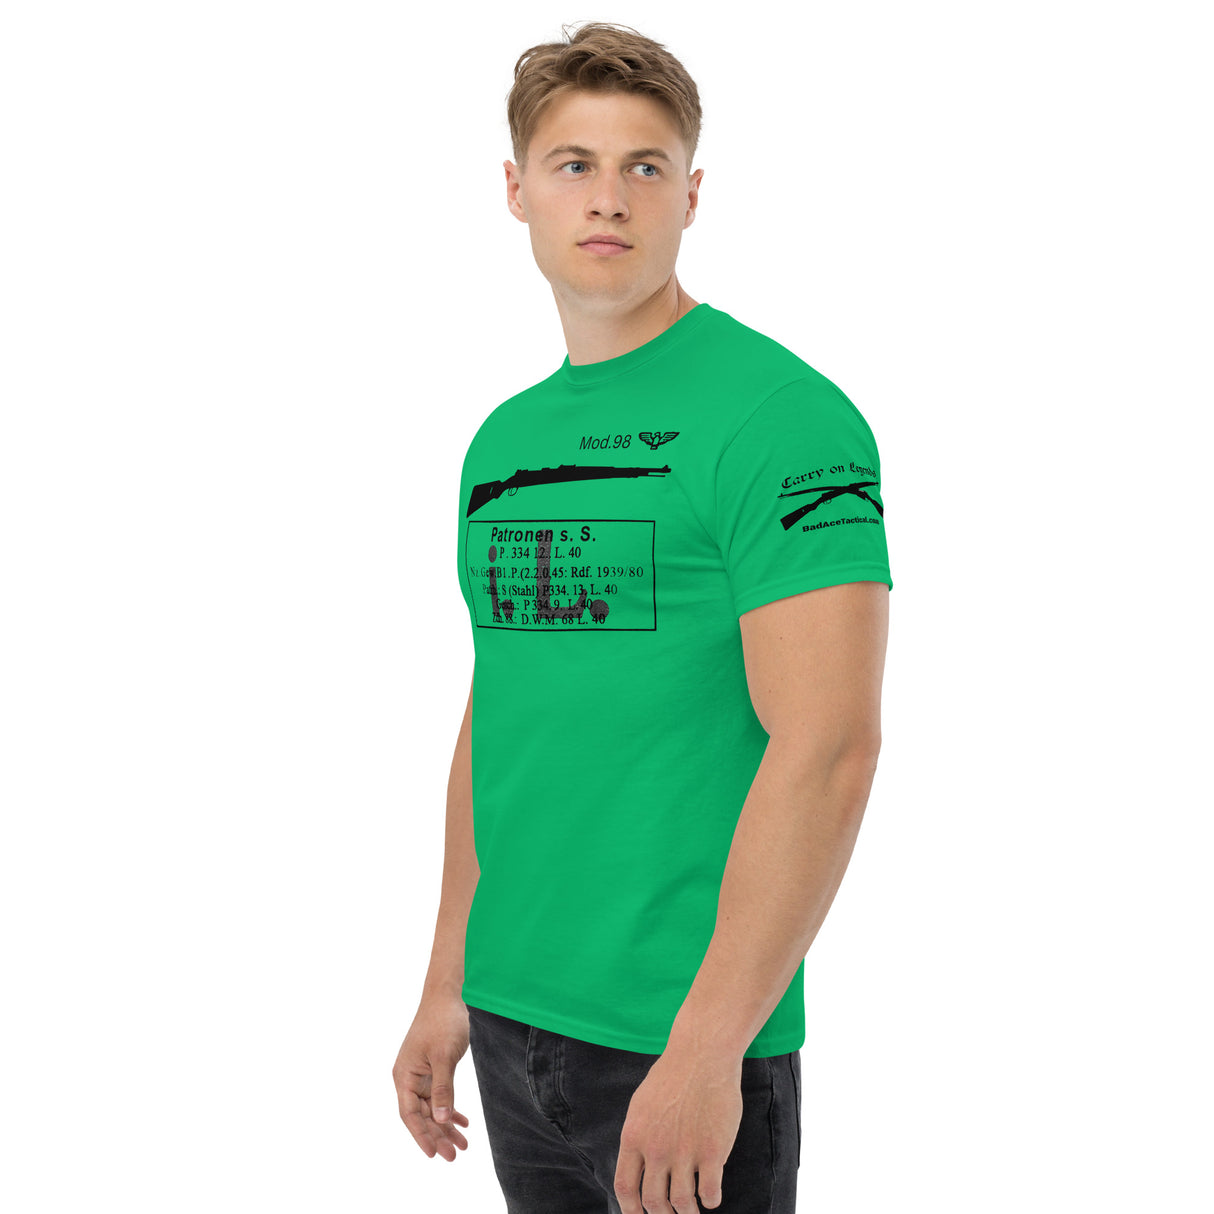 Mauser K98k Karabiner 98 kurz cotton T-shirt with receiver stamps and ammo pack labels - dark font